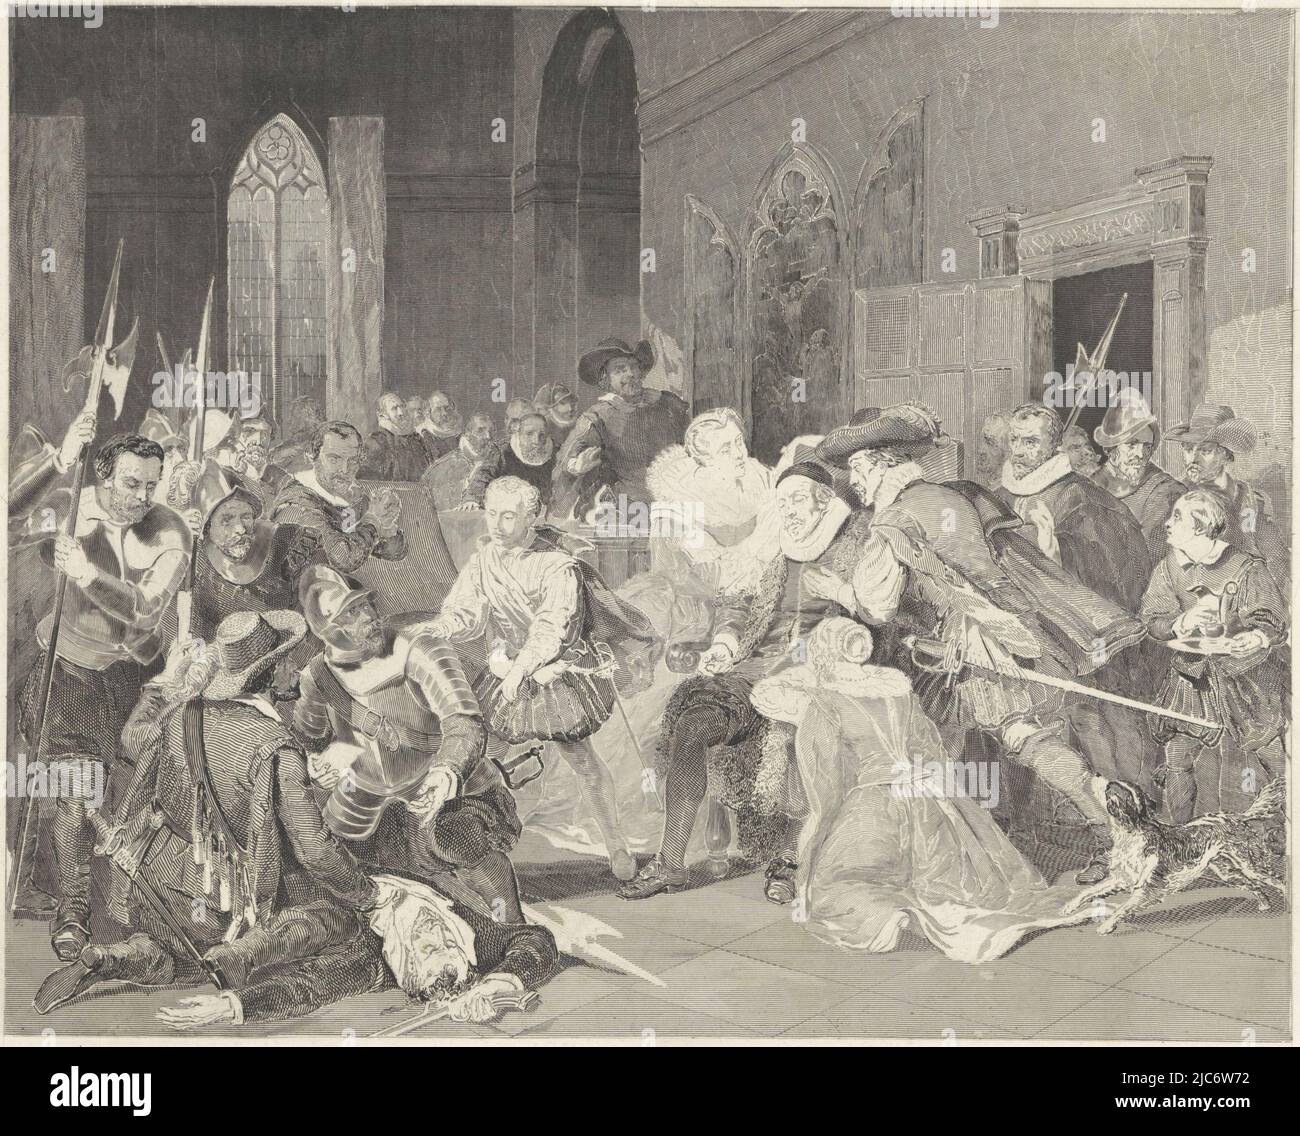 Attack of Jean de Jauregui on Prince William I, 18 March 1582 in Antwerp. Interior with the prince sitting wounded in a chair, with family and others around him. To the left on the floor is the body of the slain Jean de Jauregui. Maurice asks the soldiers to examine him., Attack of Jean de Jauregui on Prince William I, 18 March 1582, print maker: Johann Wilhelm Kaiser (I), after: Nicolaas Pieneman, Amsterdam, 1853, paper, etching, engraving, h 415 mm × w 490 mm Stock Photo